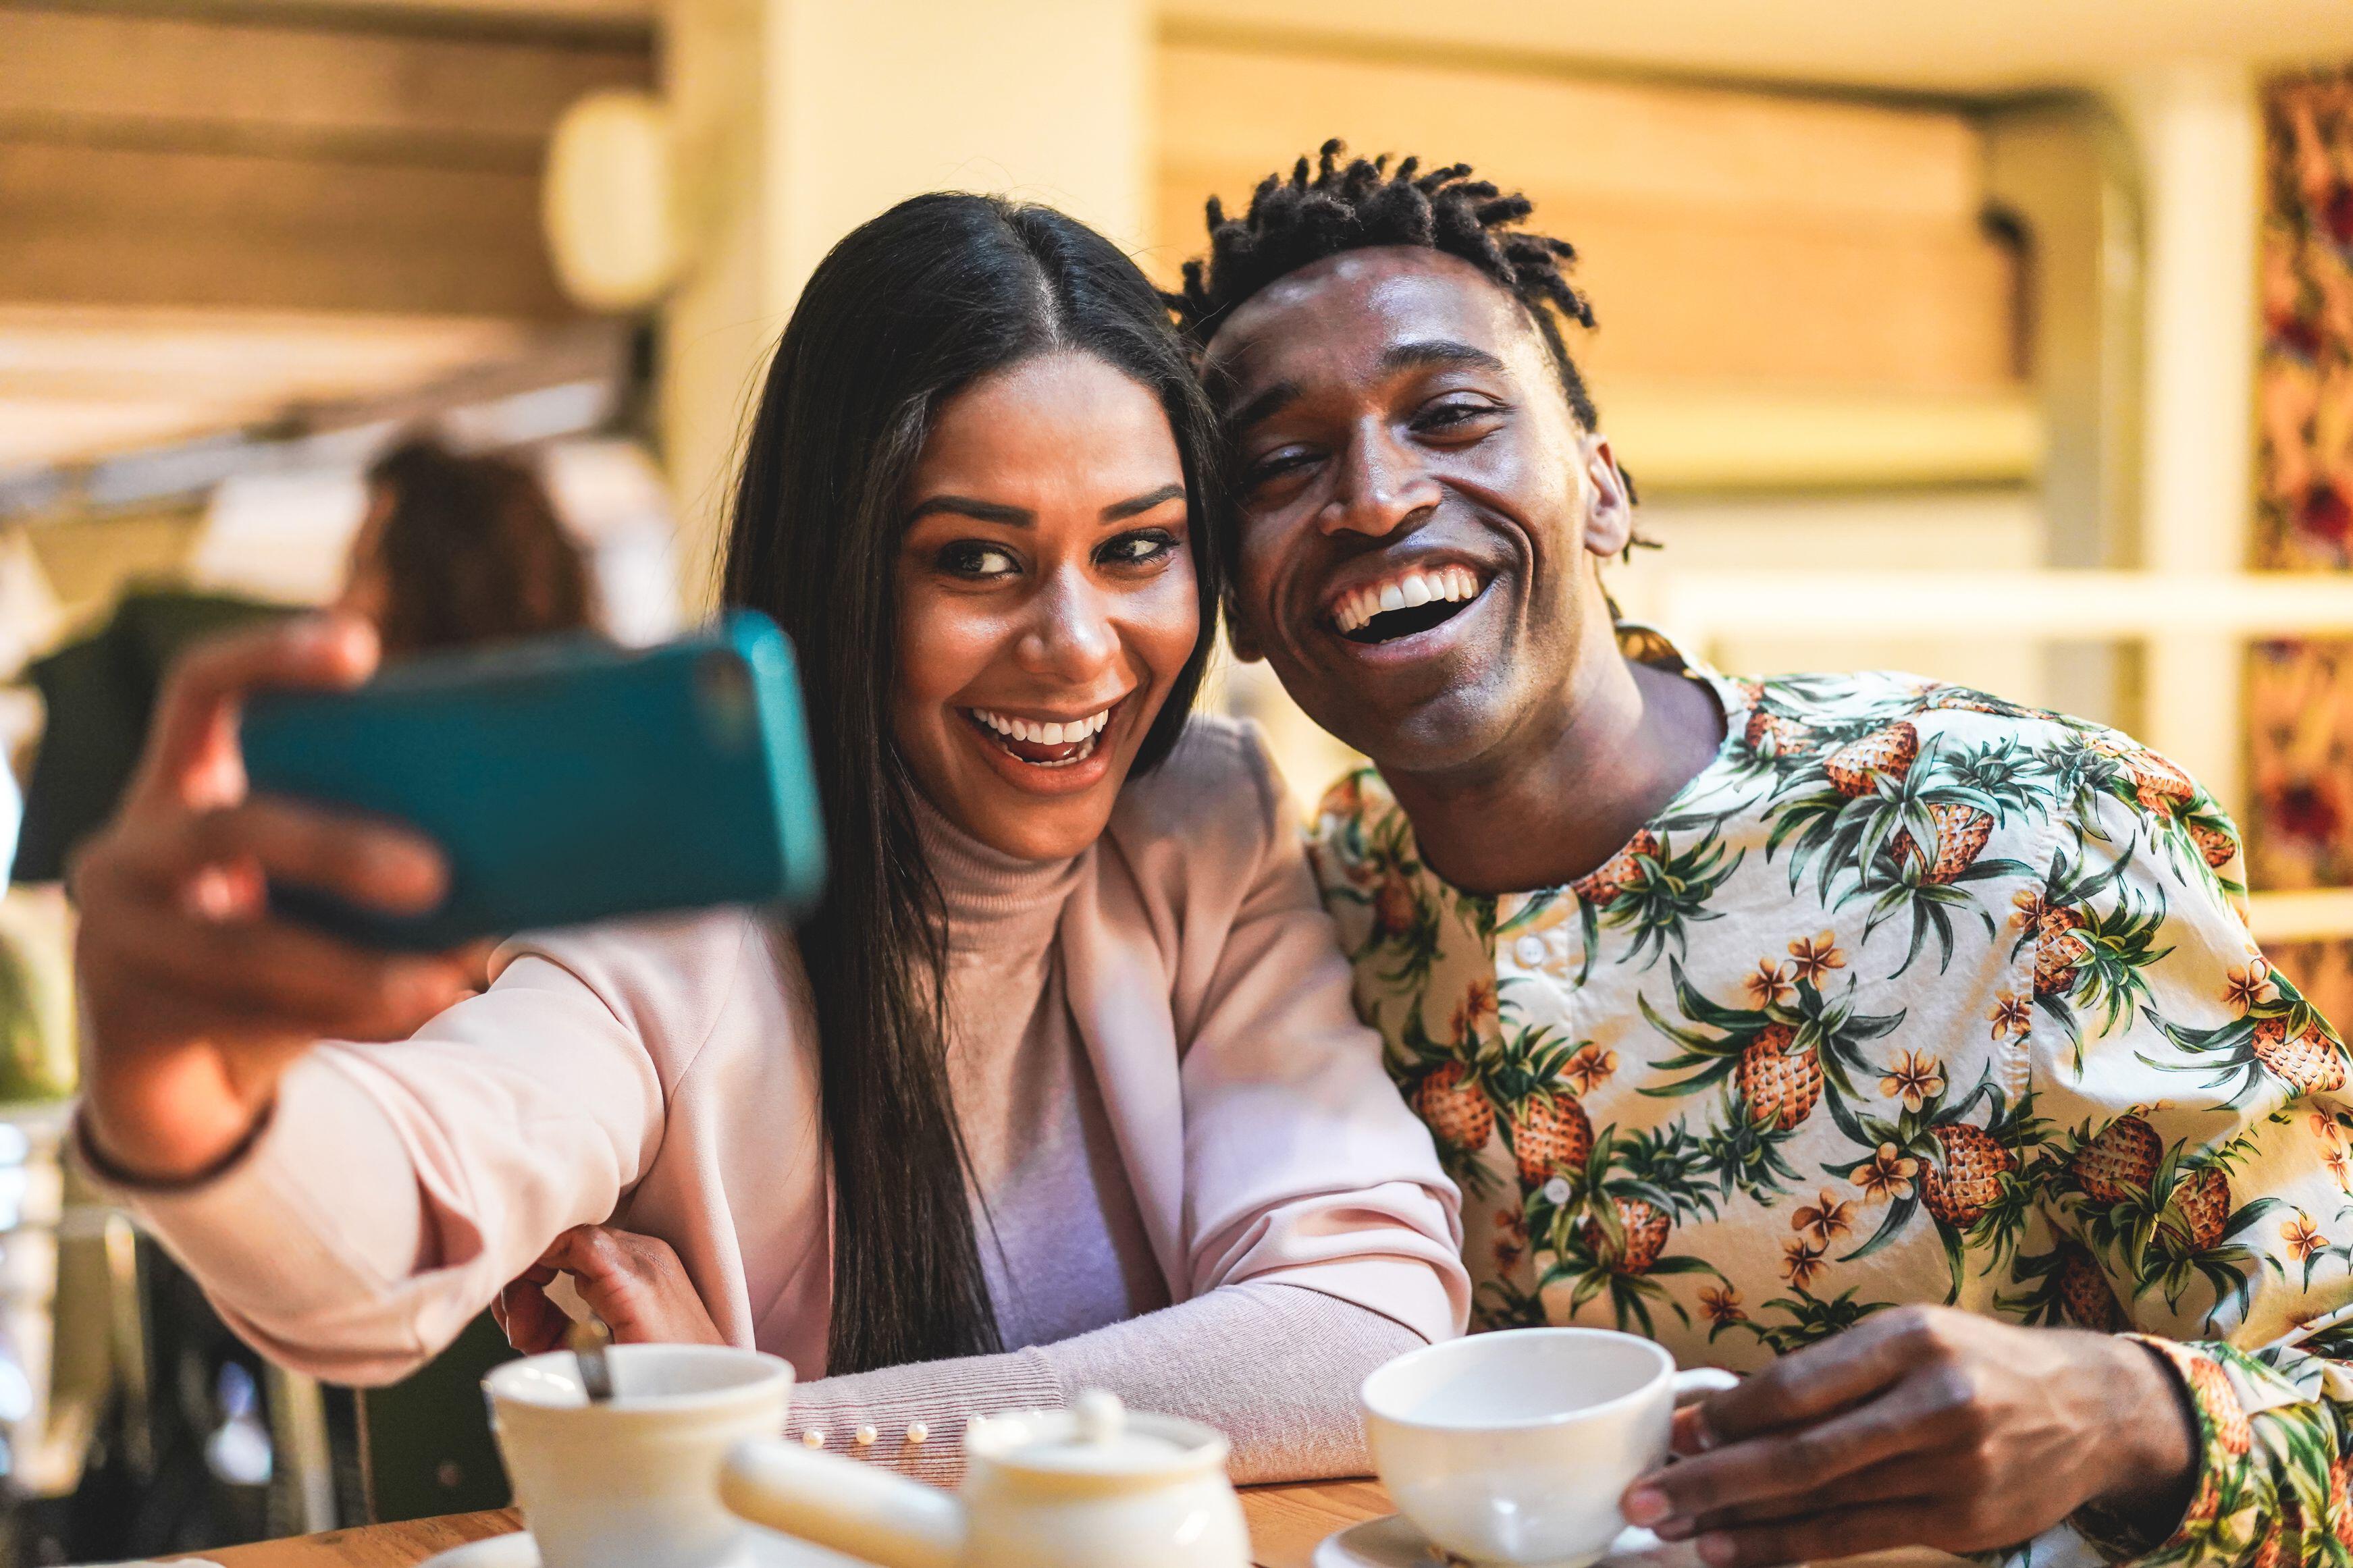 Smiling man and woman taking a selfie together in a cafe